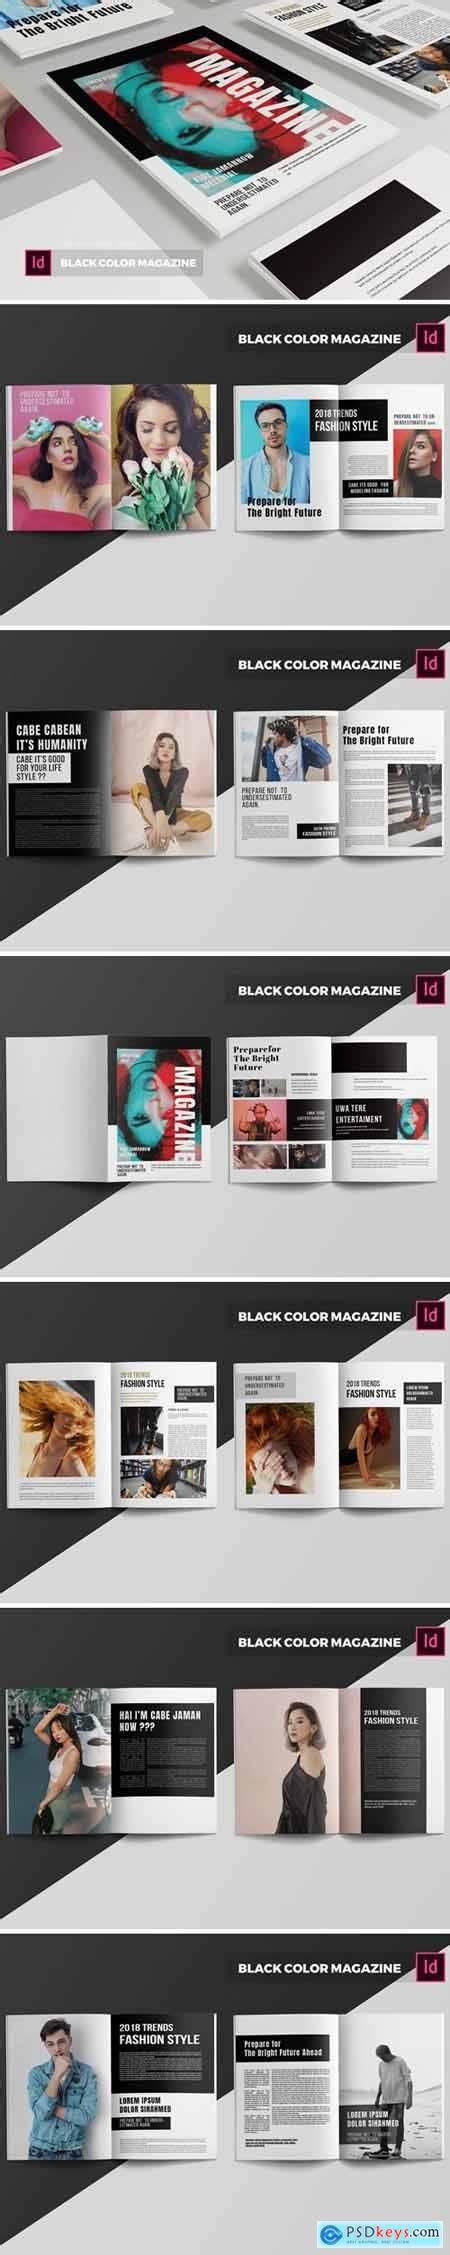 Black Color Magazine Template Free Download Photoshop Vector Stock